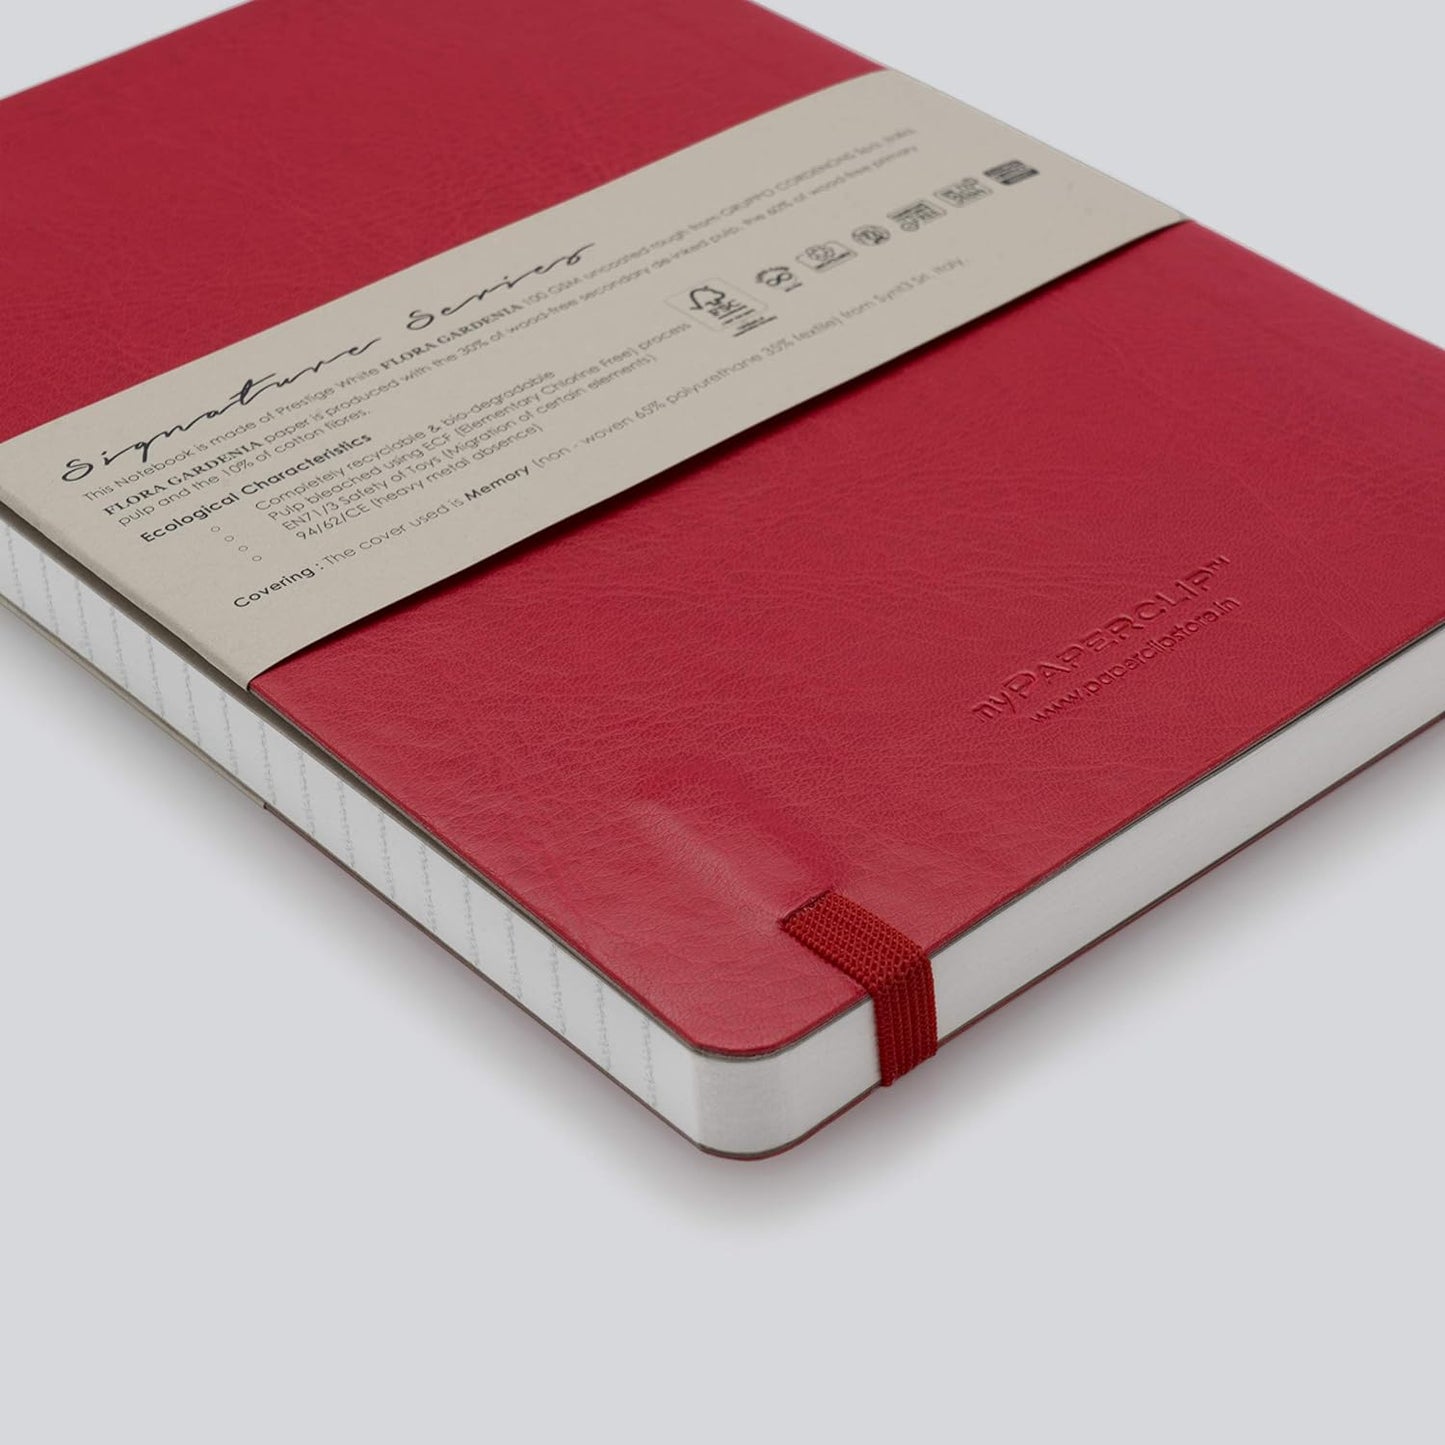 Mypaperclip Note Book, Signature Series, A5, (148 X 210 Mm, 5.83 X 8.27 In.), Ruled, Red (Sspu192A5-R Red)